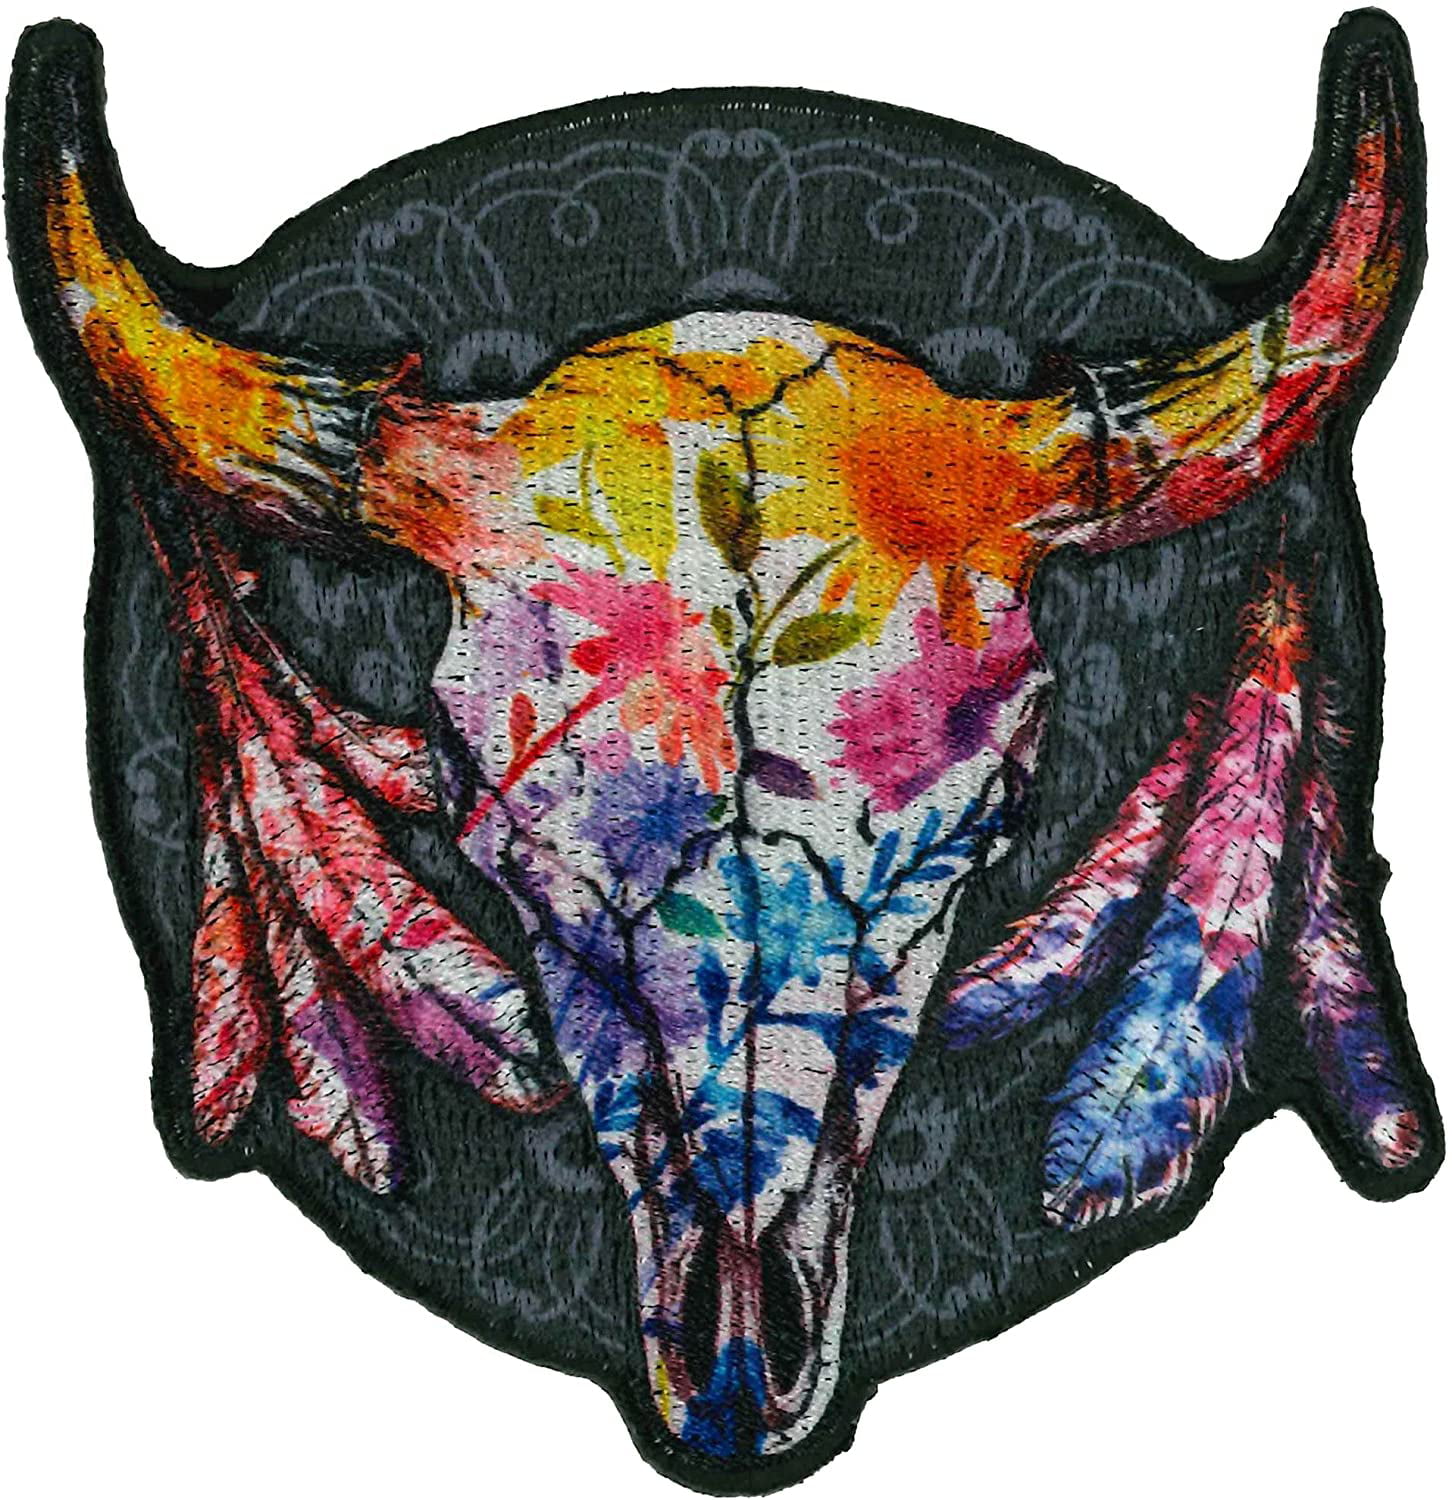 Horn Skull Red Iron Cross Patch Sew on Embroidered Fabric Applique DIY Parts 